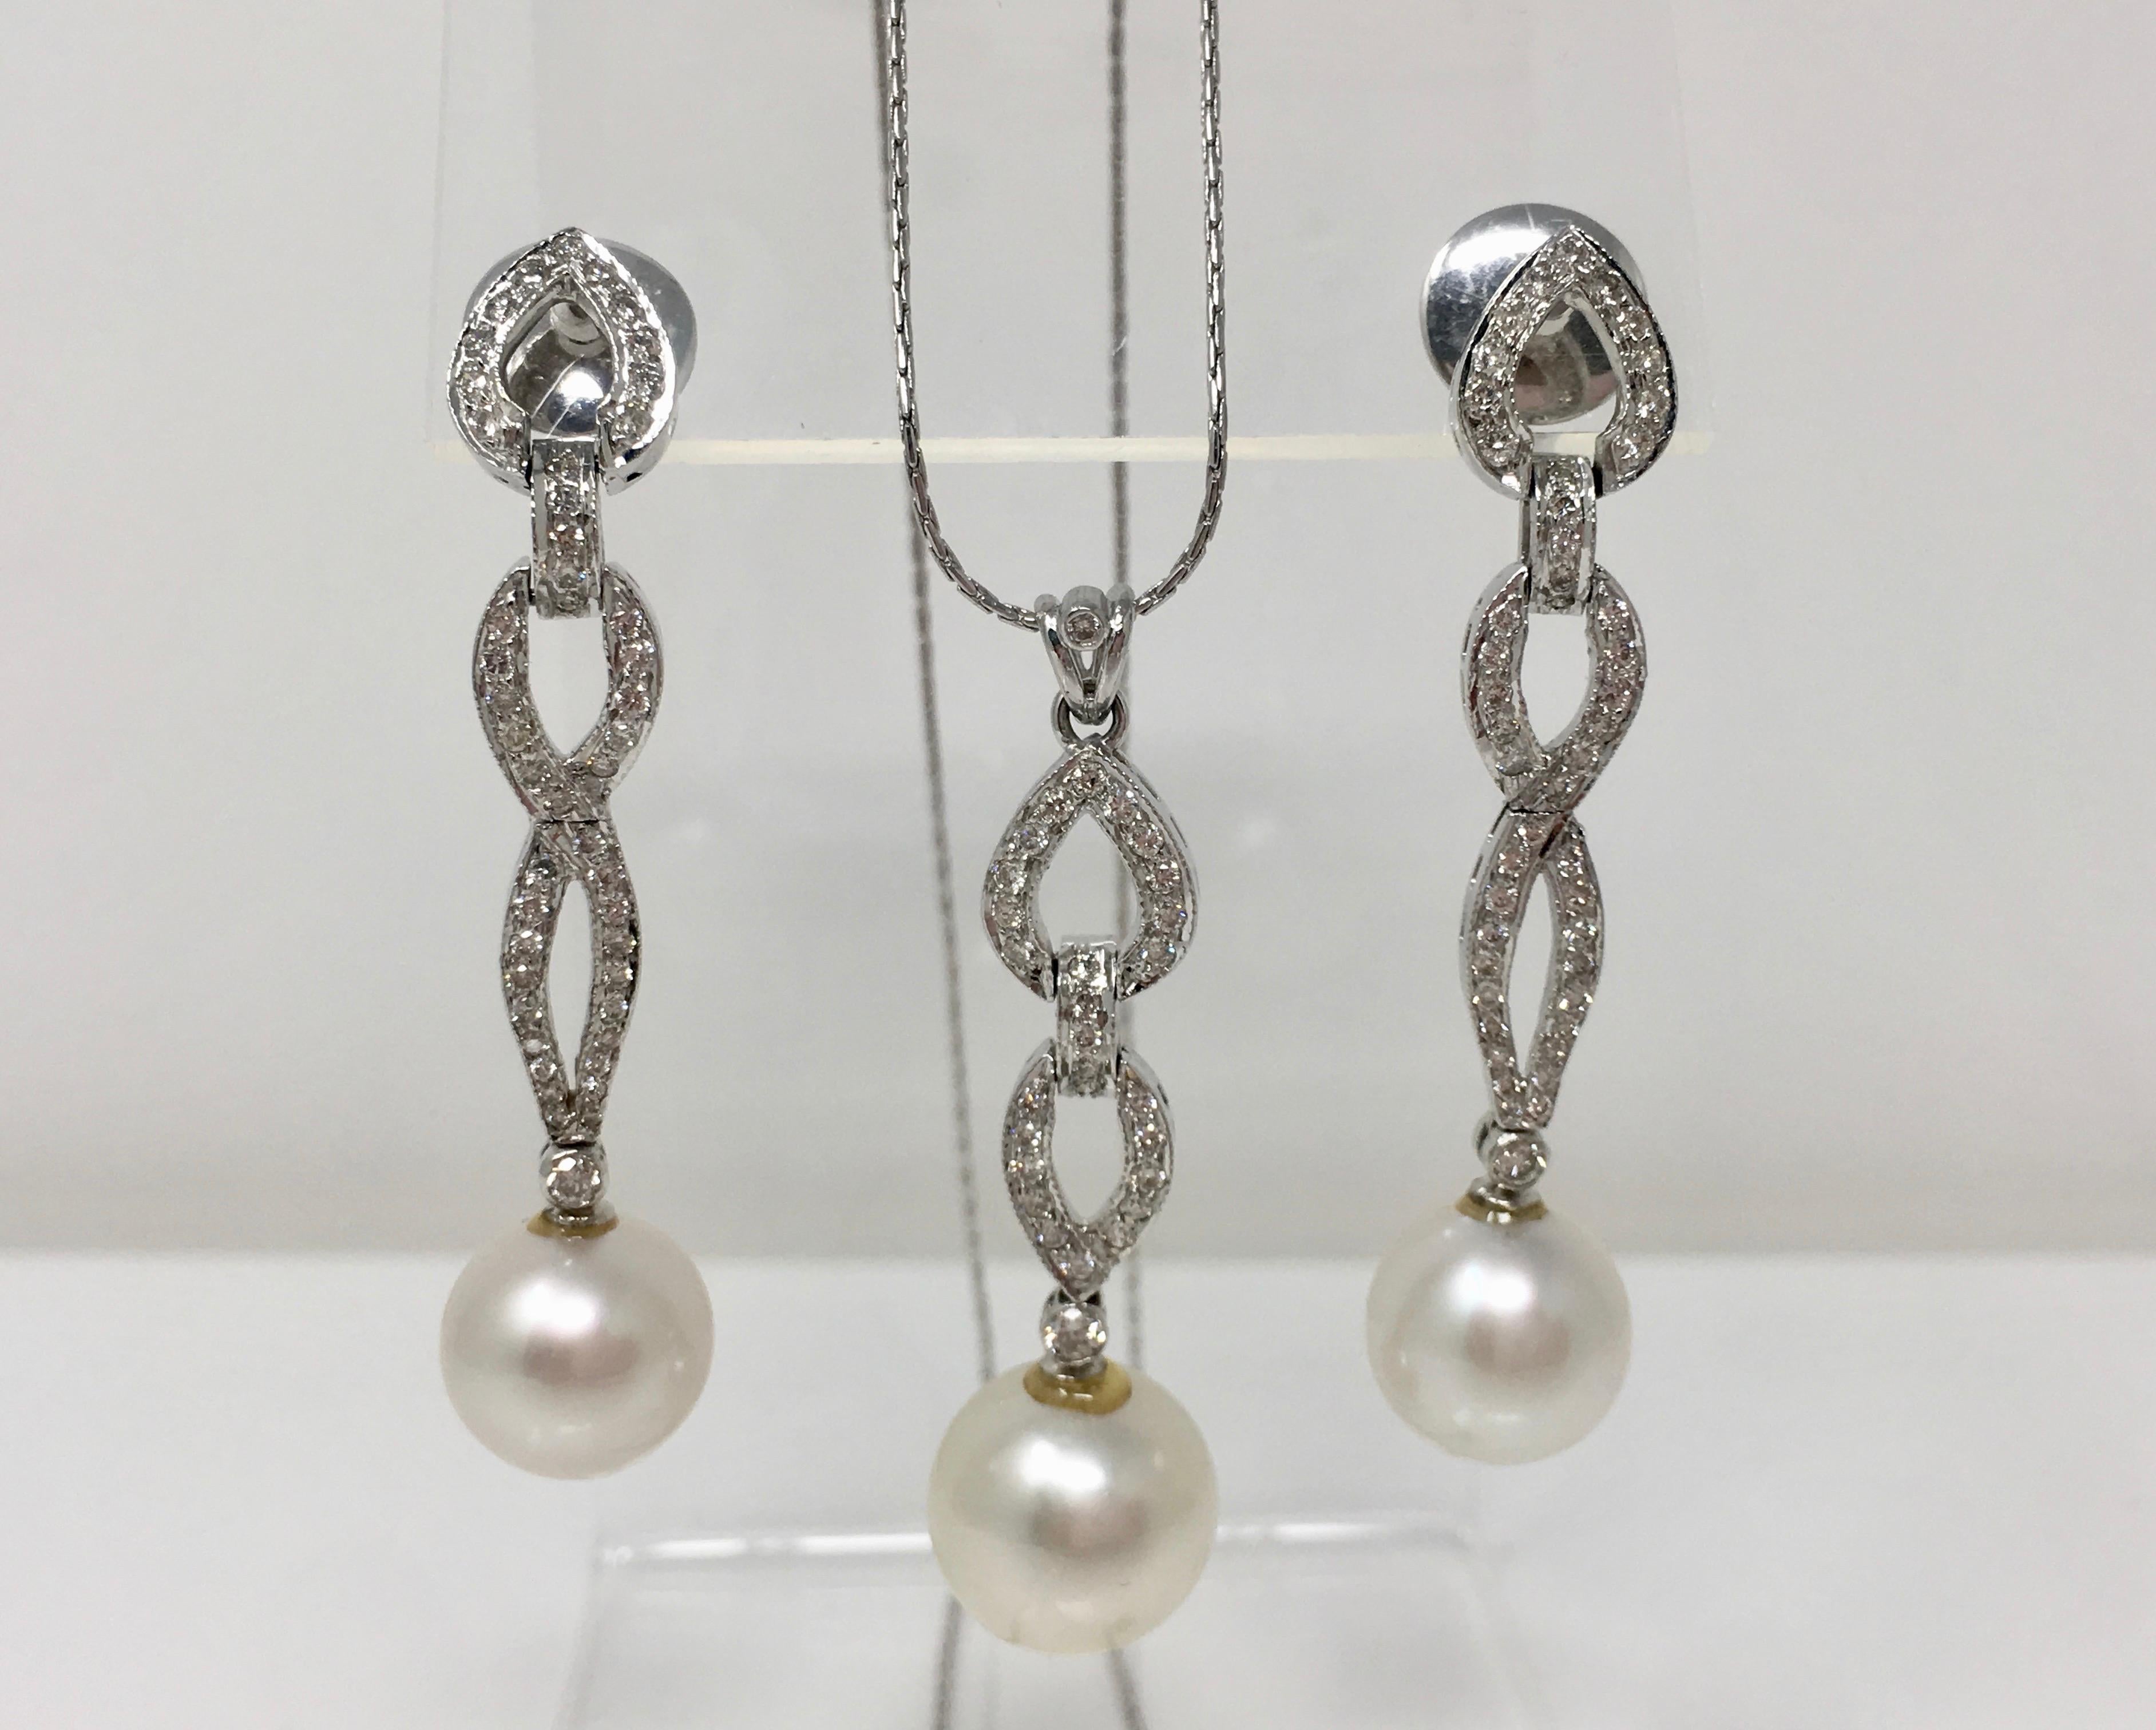 This fabulous white round brilliant diamond weighing 1.68 carat with VS clarity and GH color and white south sea pearls three piece pendant set includes a diamond pendant  suspended from the 18k white gold chain and a pair of earrings . The length